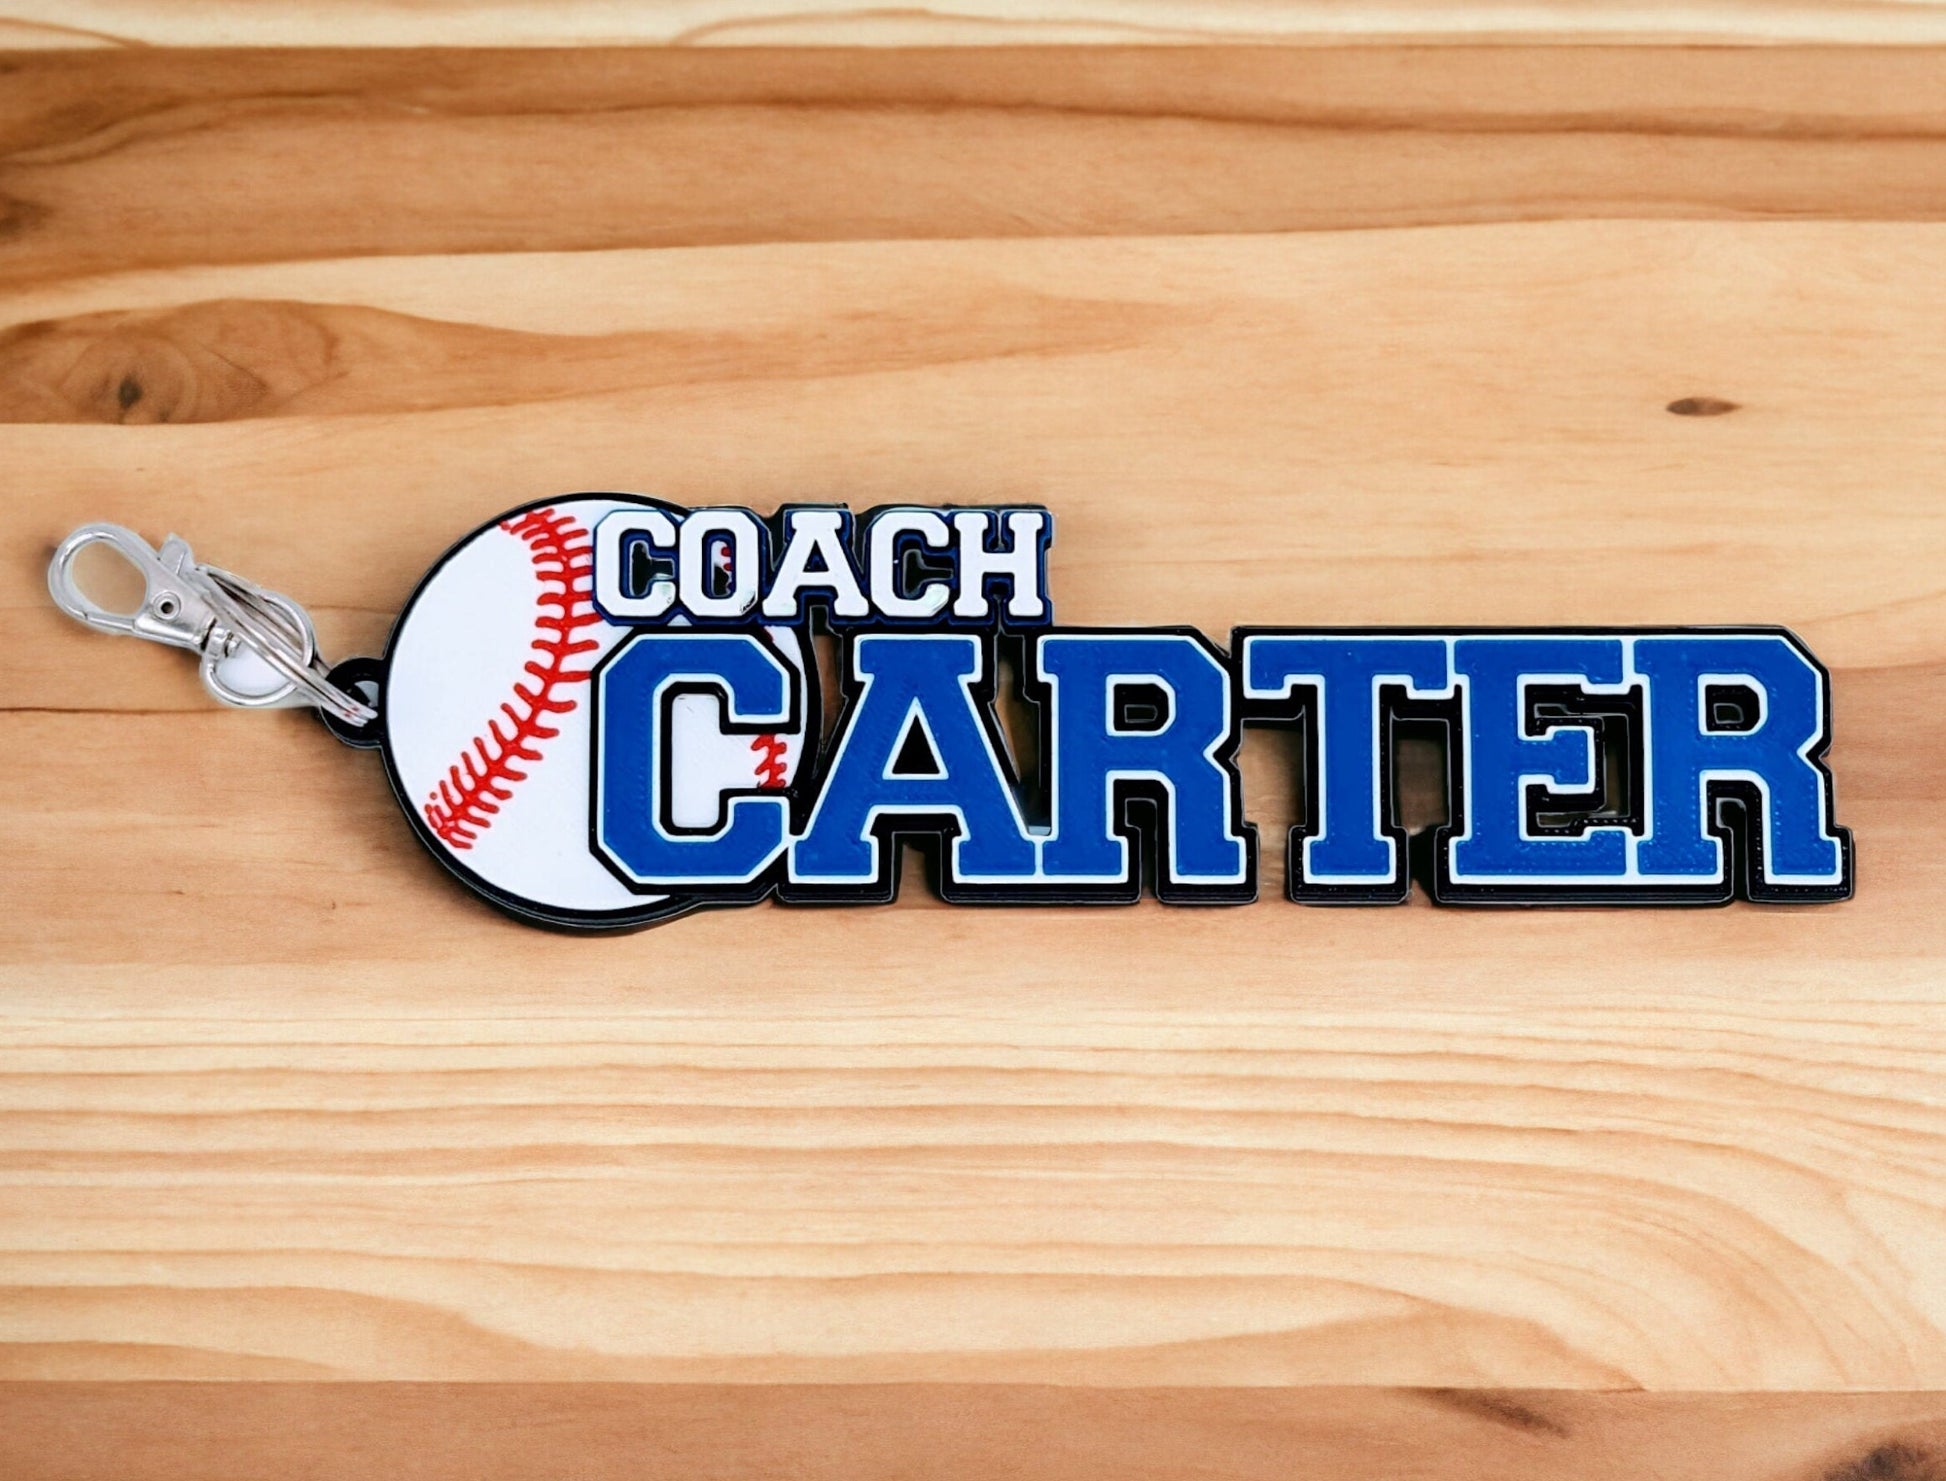 Sleek, round baseball bag tag featuring a detailed baseball stitch design, personalized for coaches.